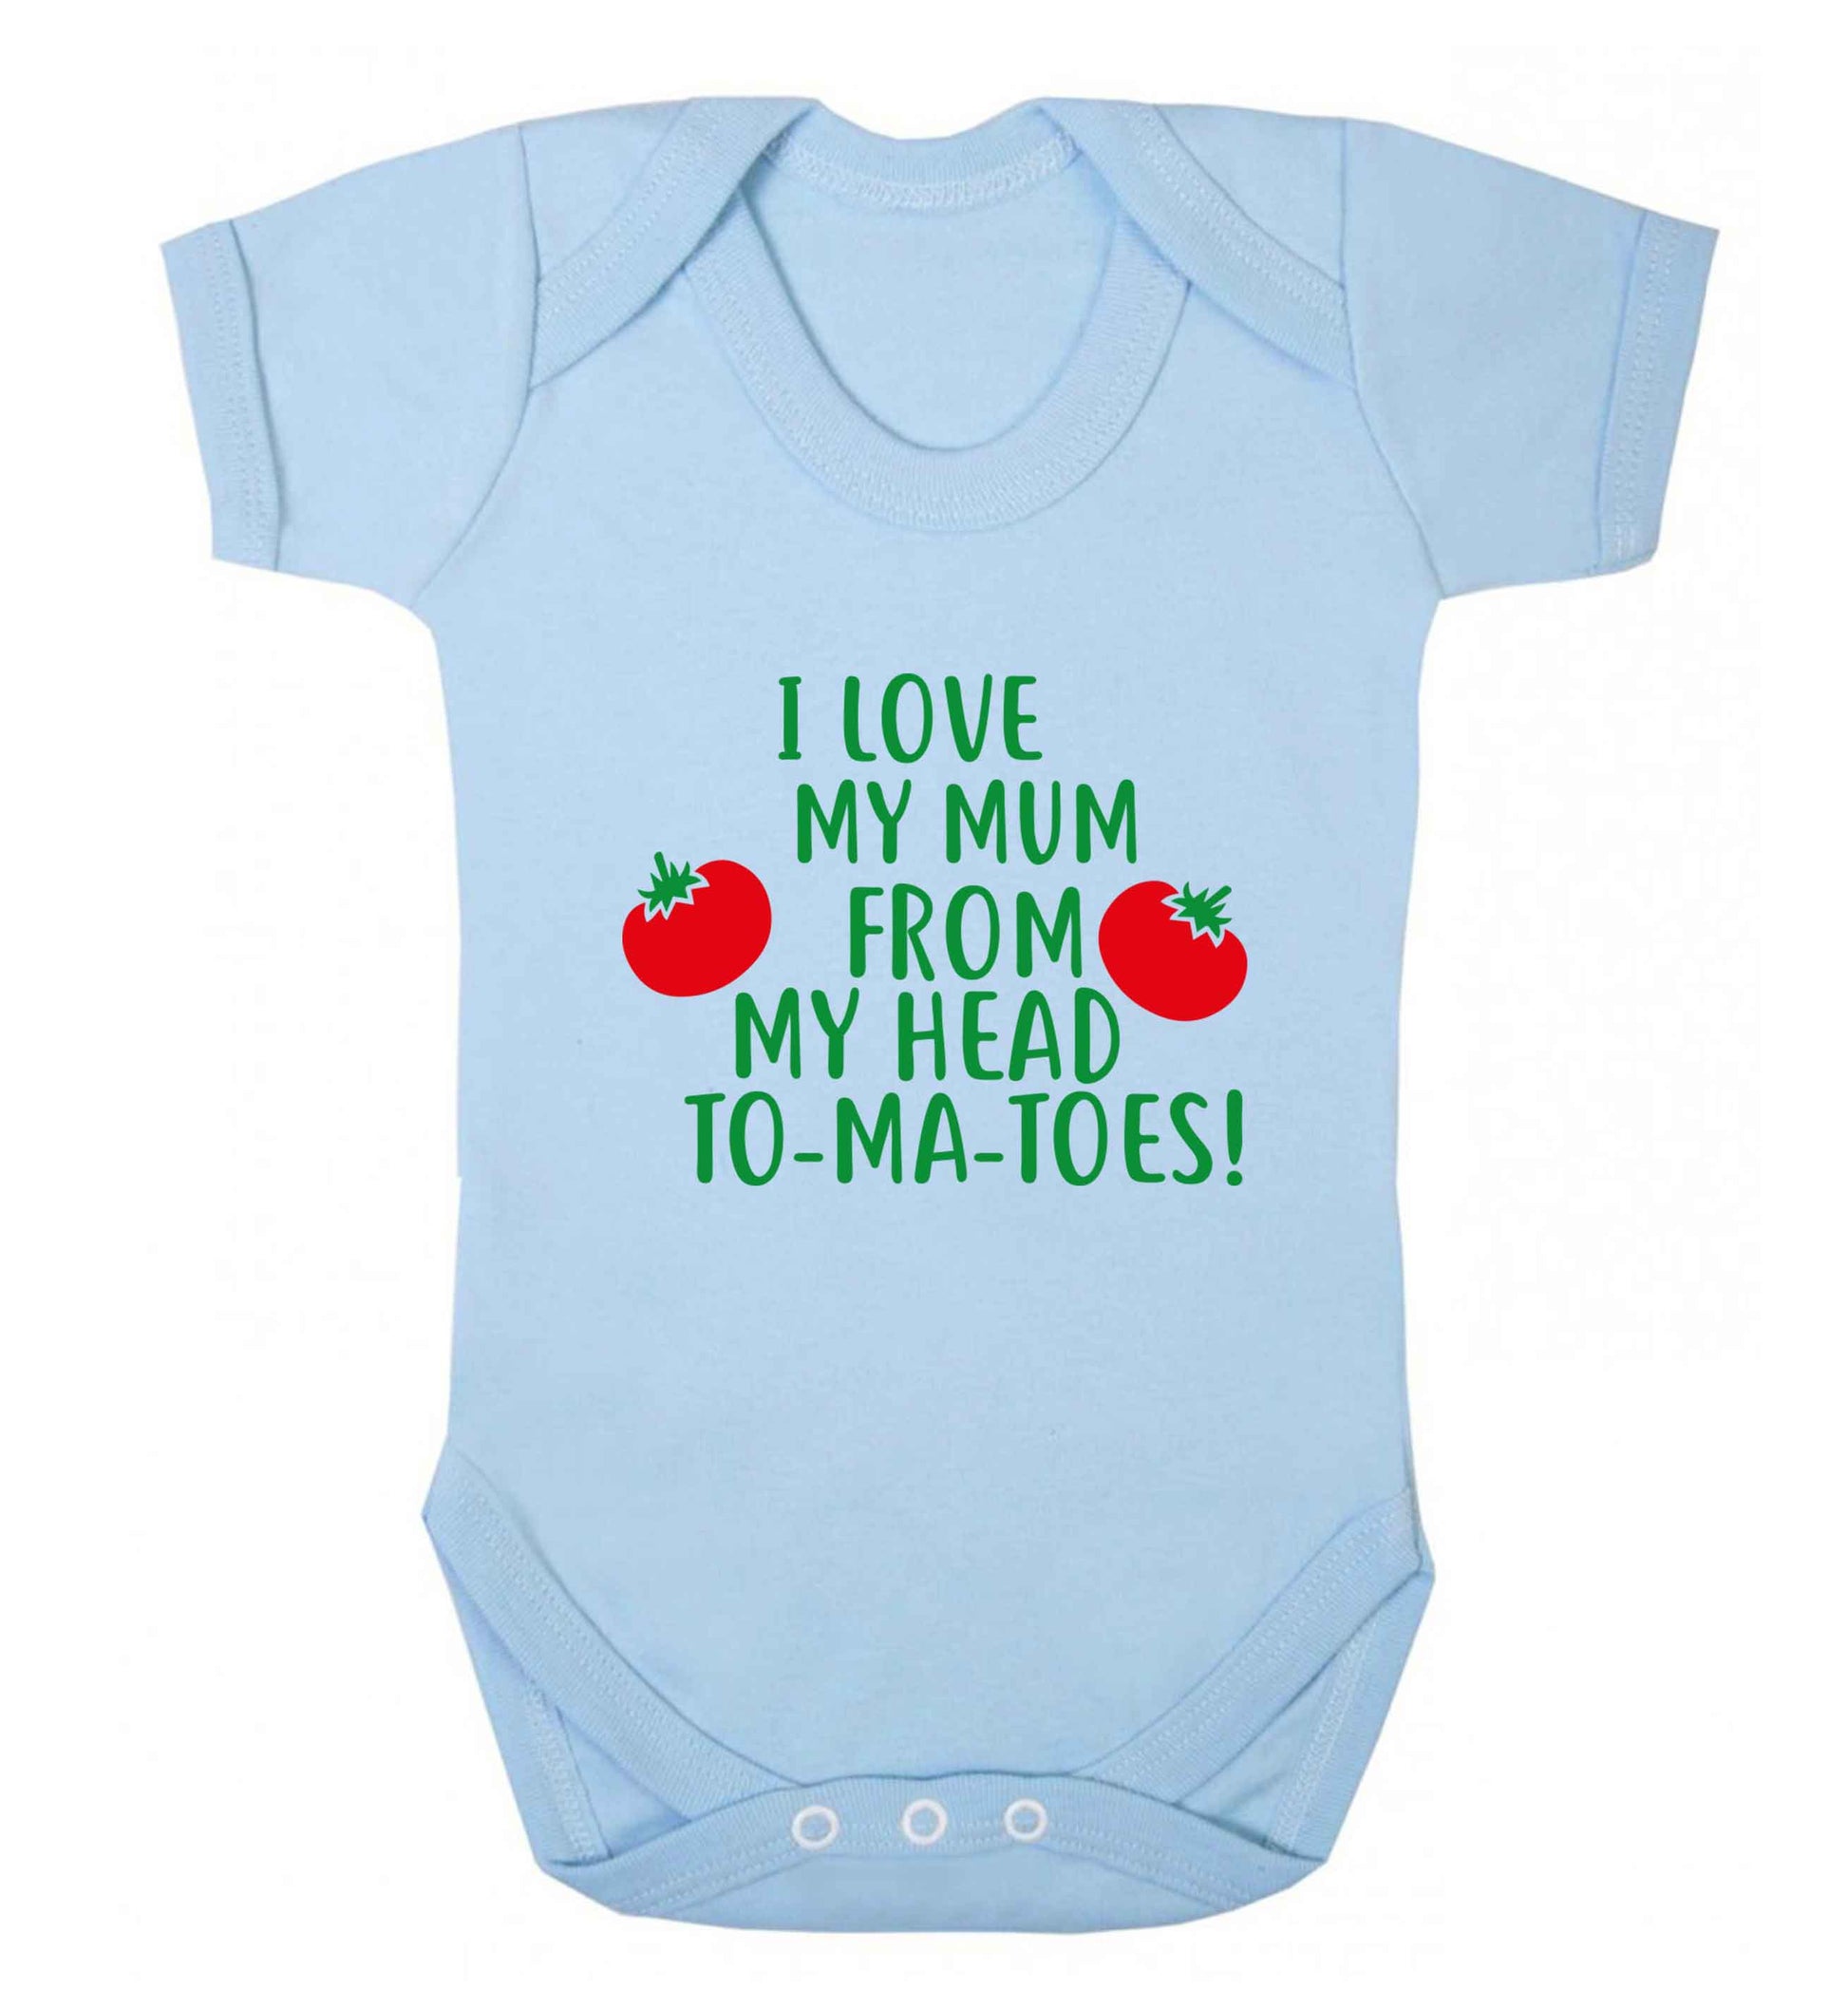 I love my mum from my head to-my-toes! baby vest pale blue 18-24 months